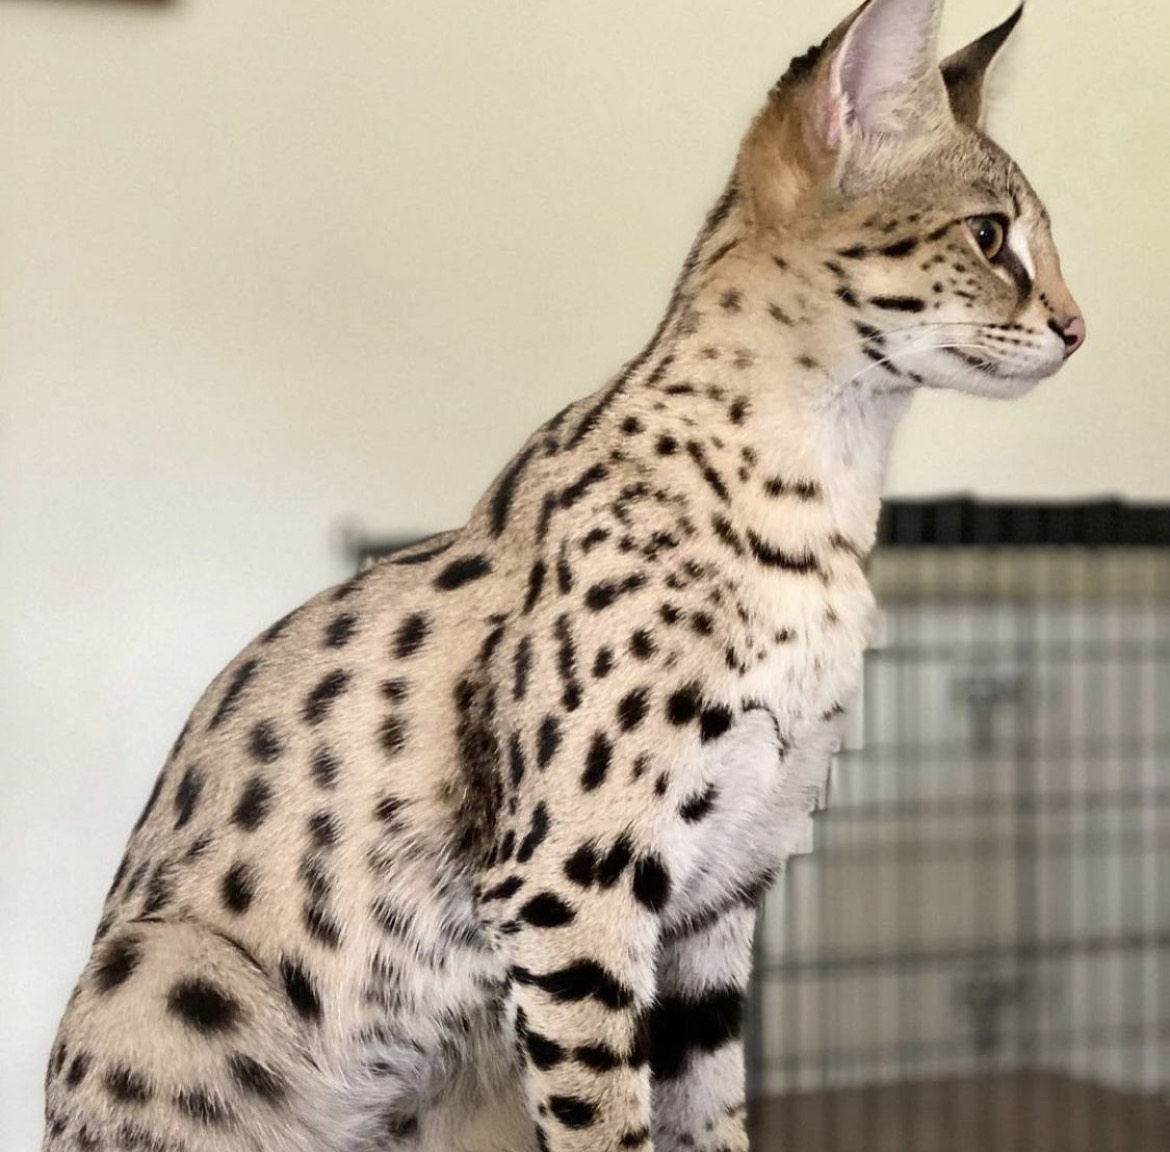 Bengal cats for sale, ocelot kittens as pets, buy a serval kitten, buy a serval cat, buy savannah kitten